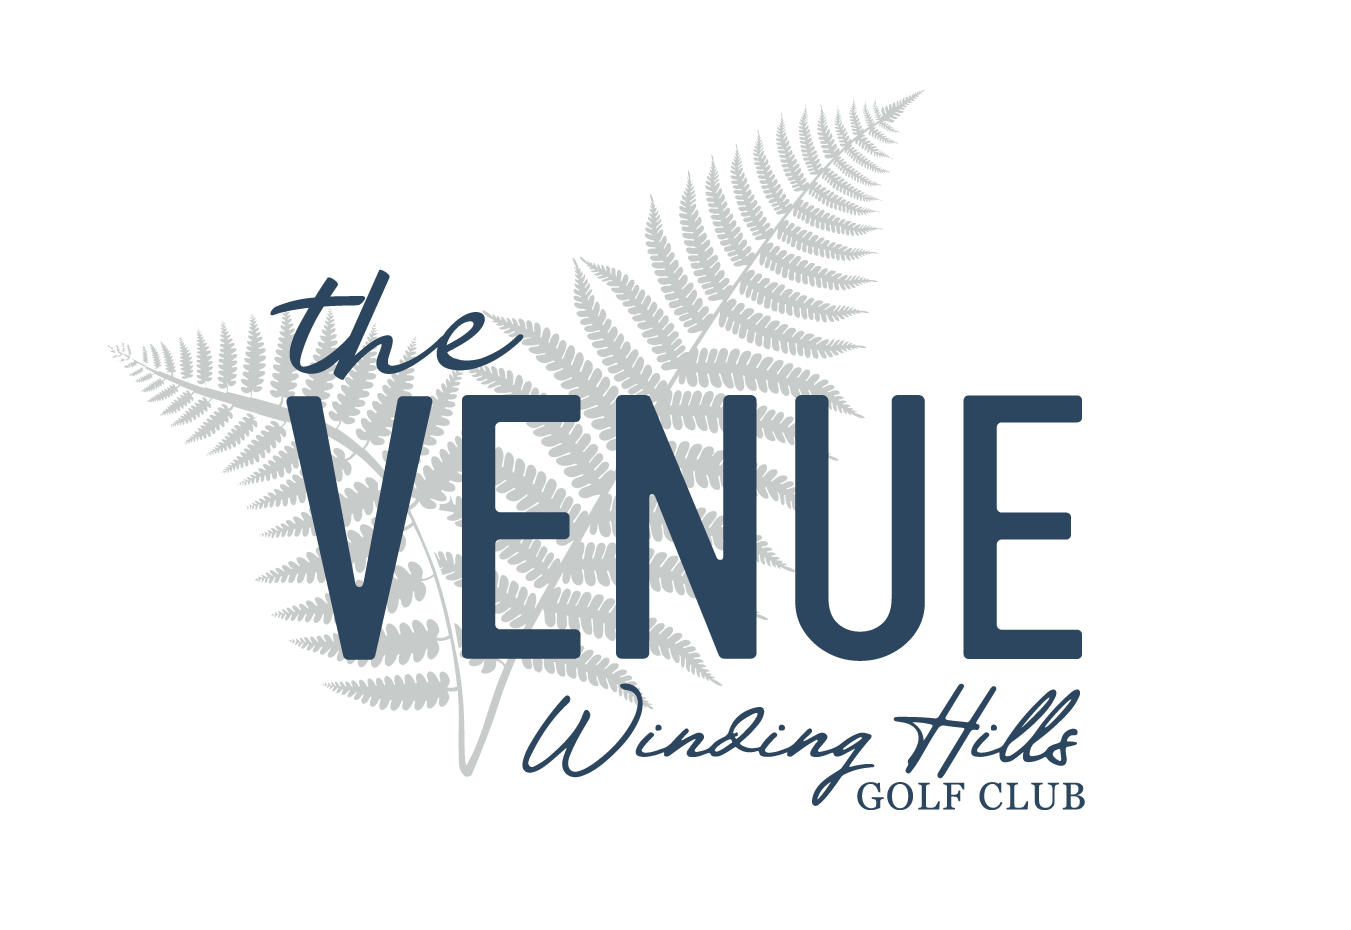 The Venue at Winding Hills